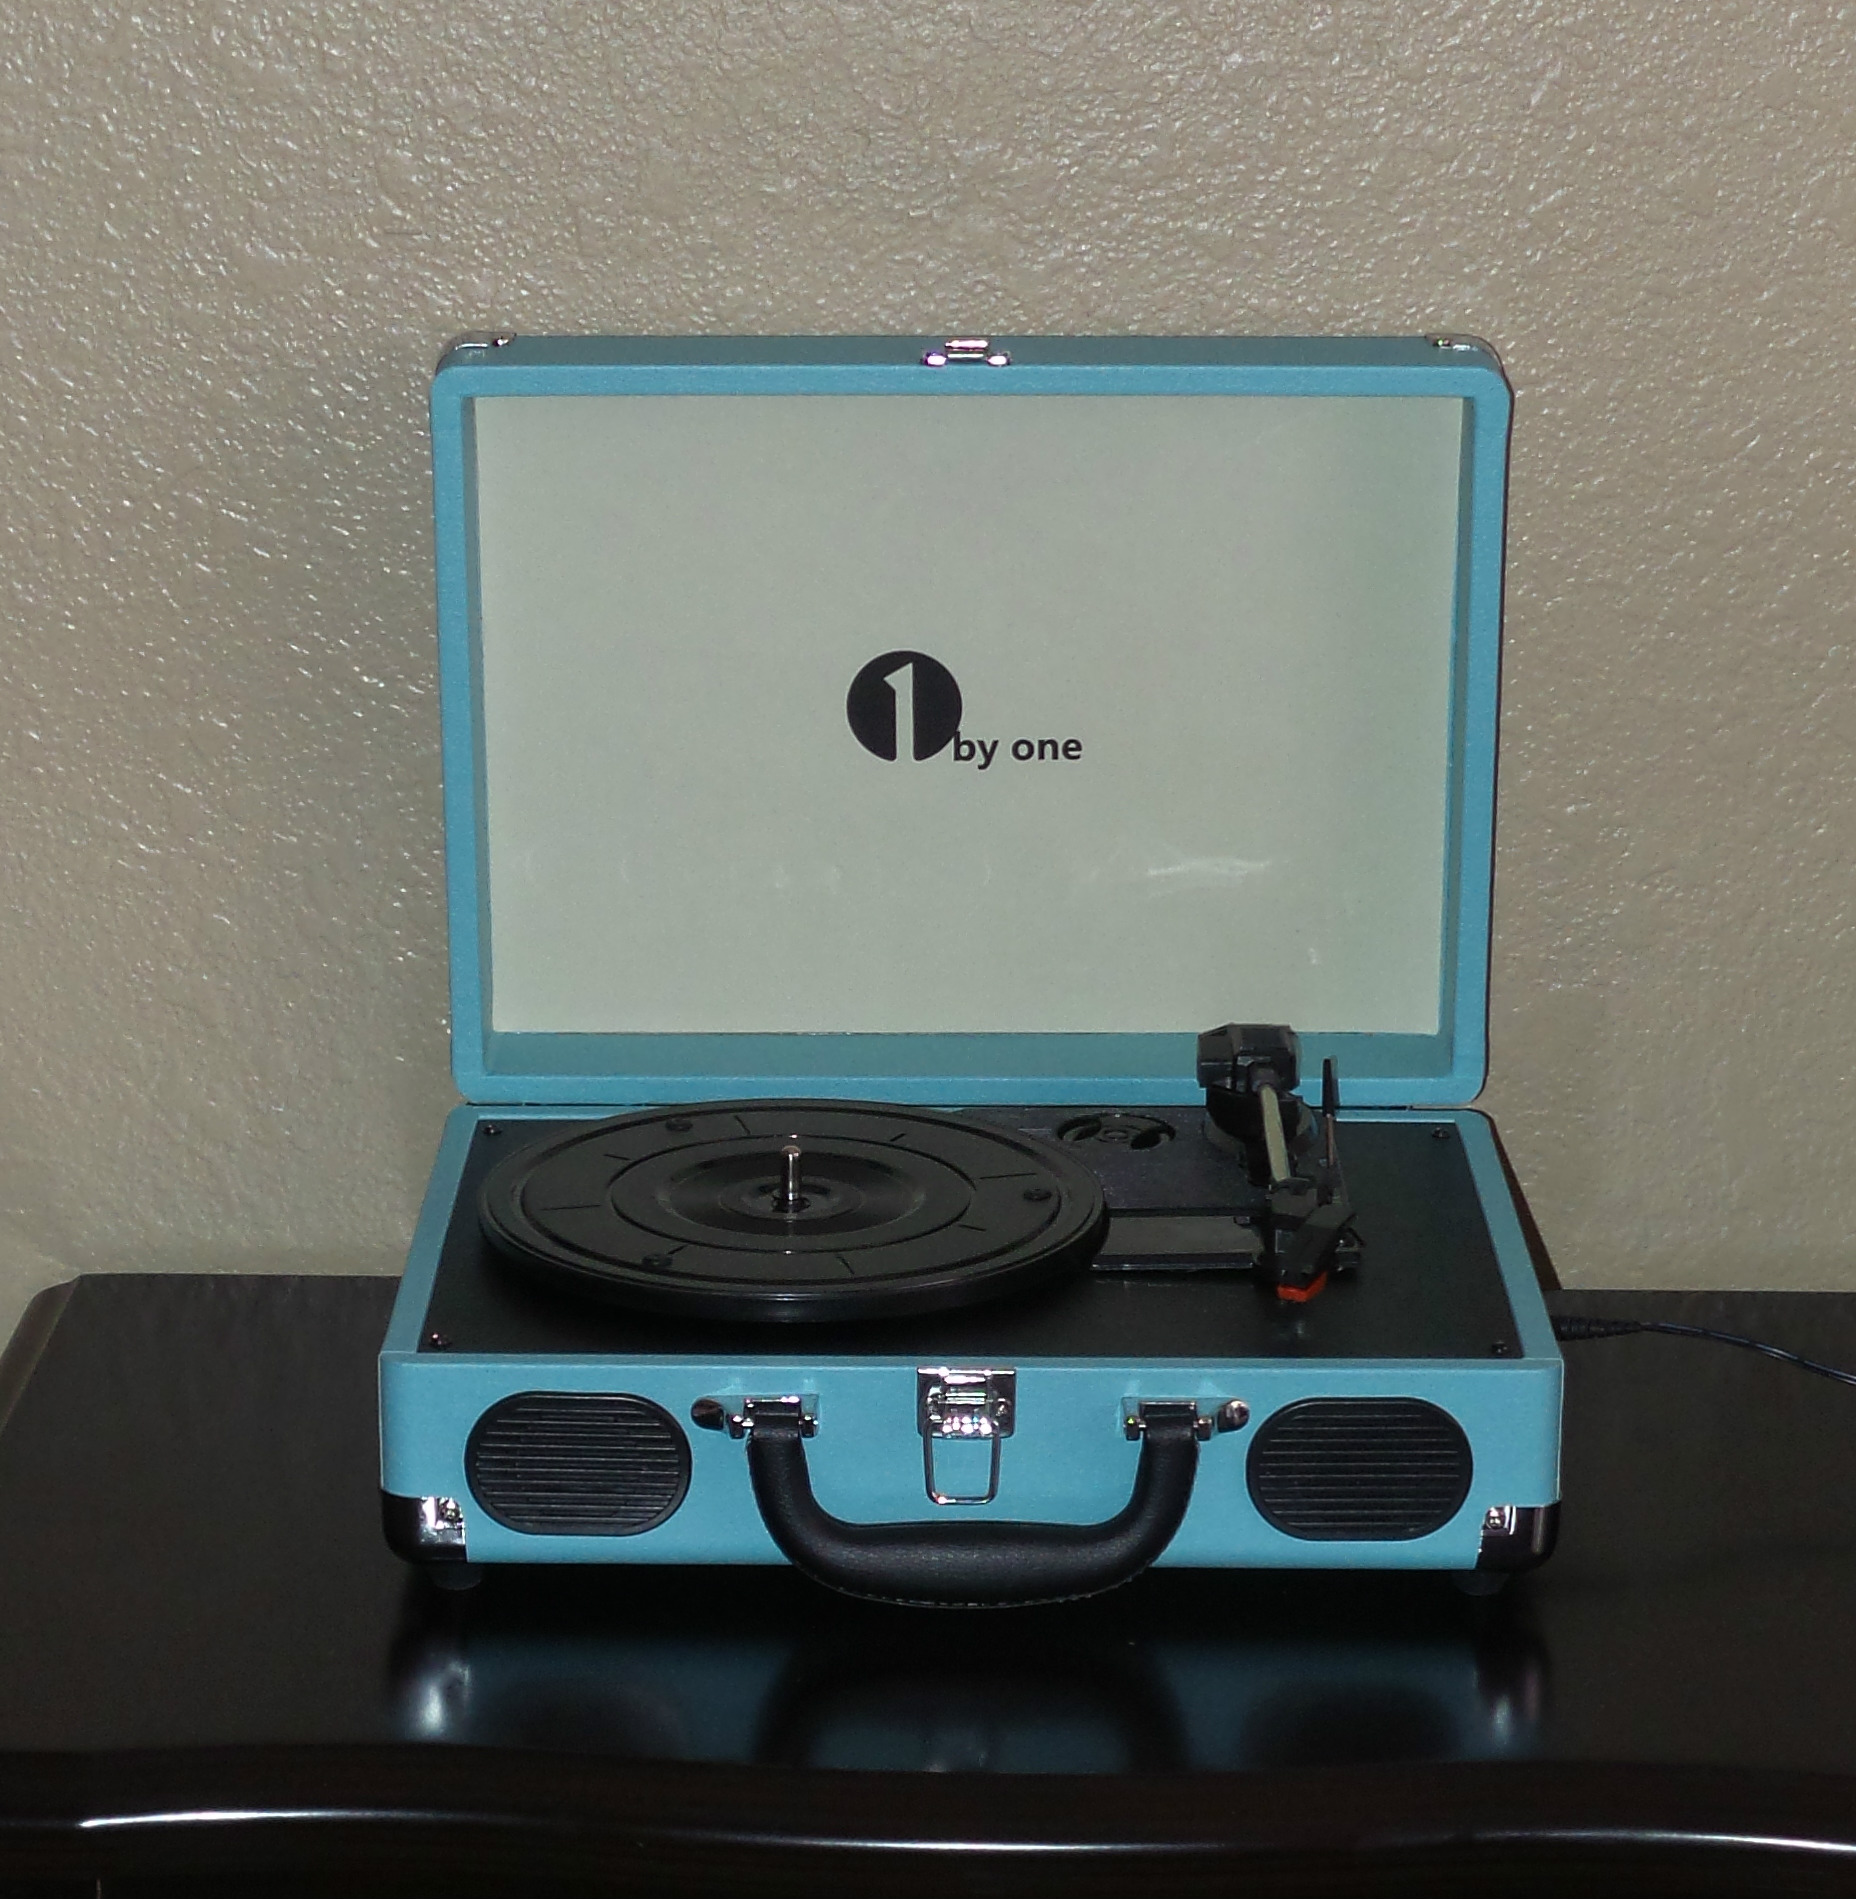 1byone turntable